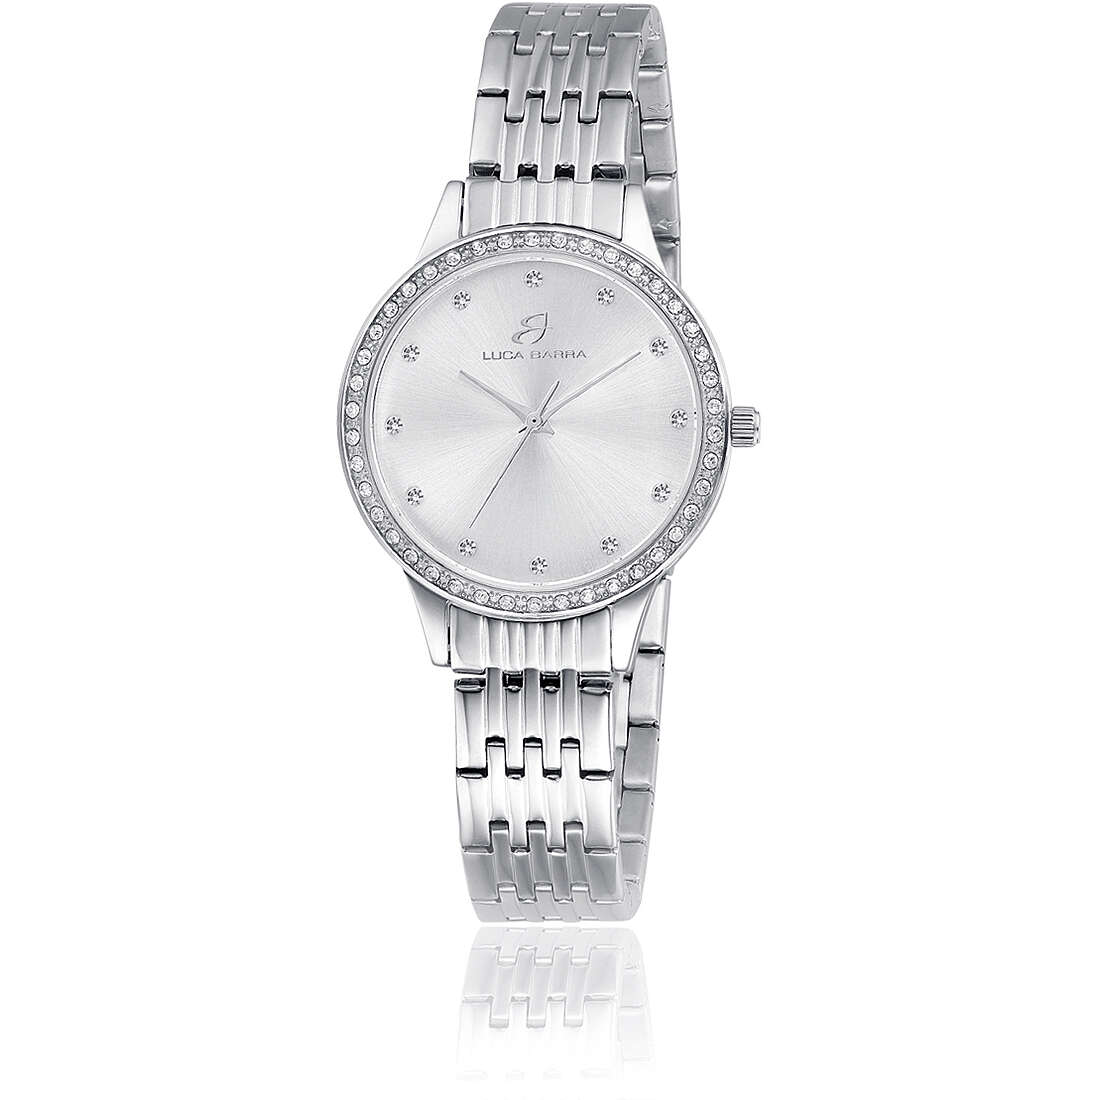 only time watch Steel Silver dial woman BW276